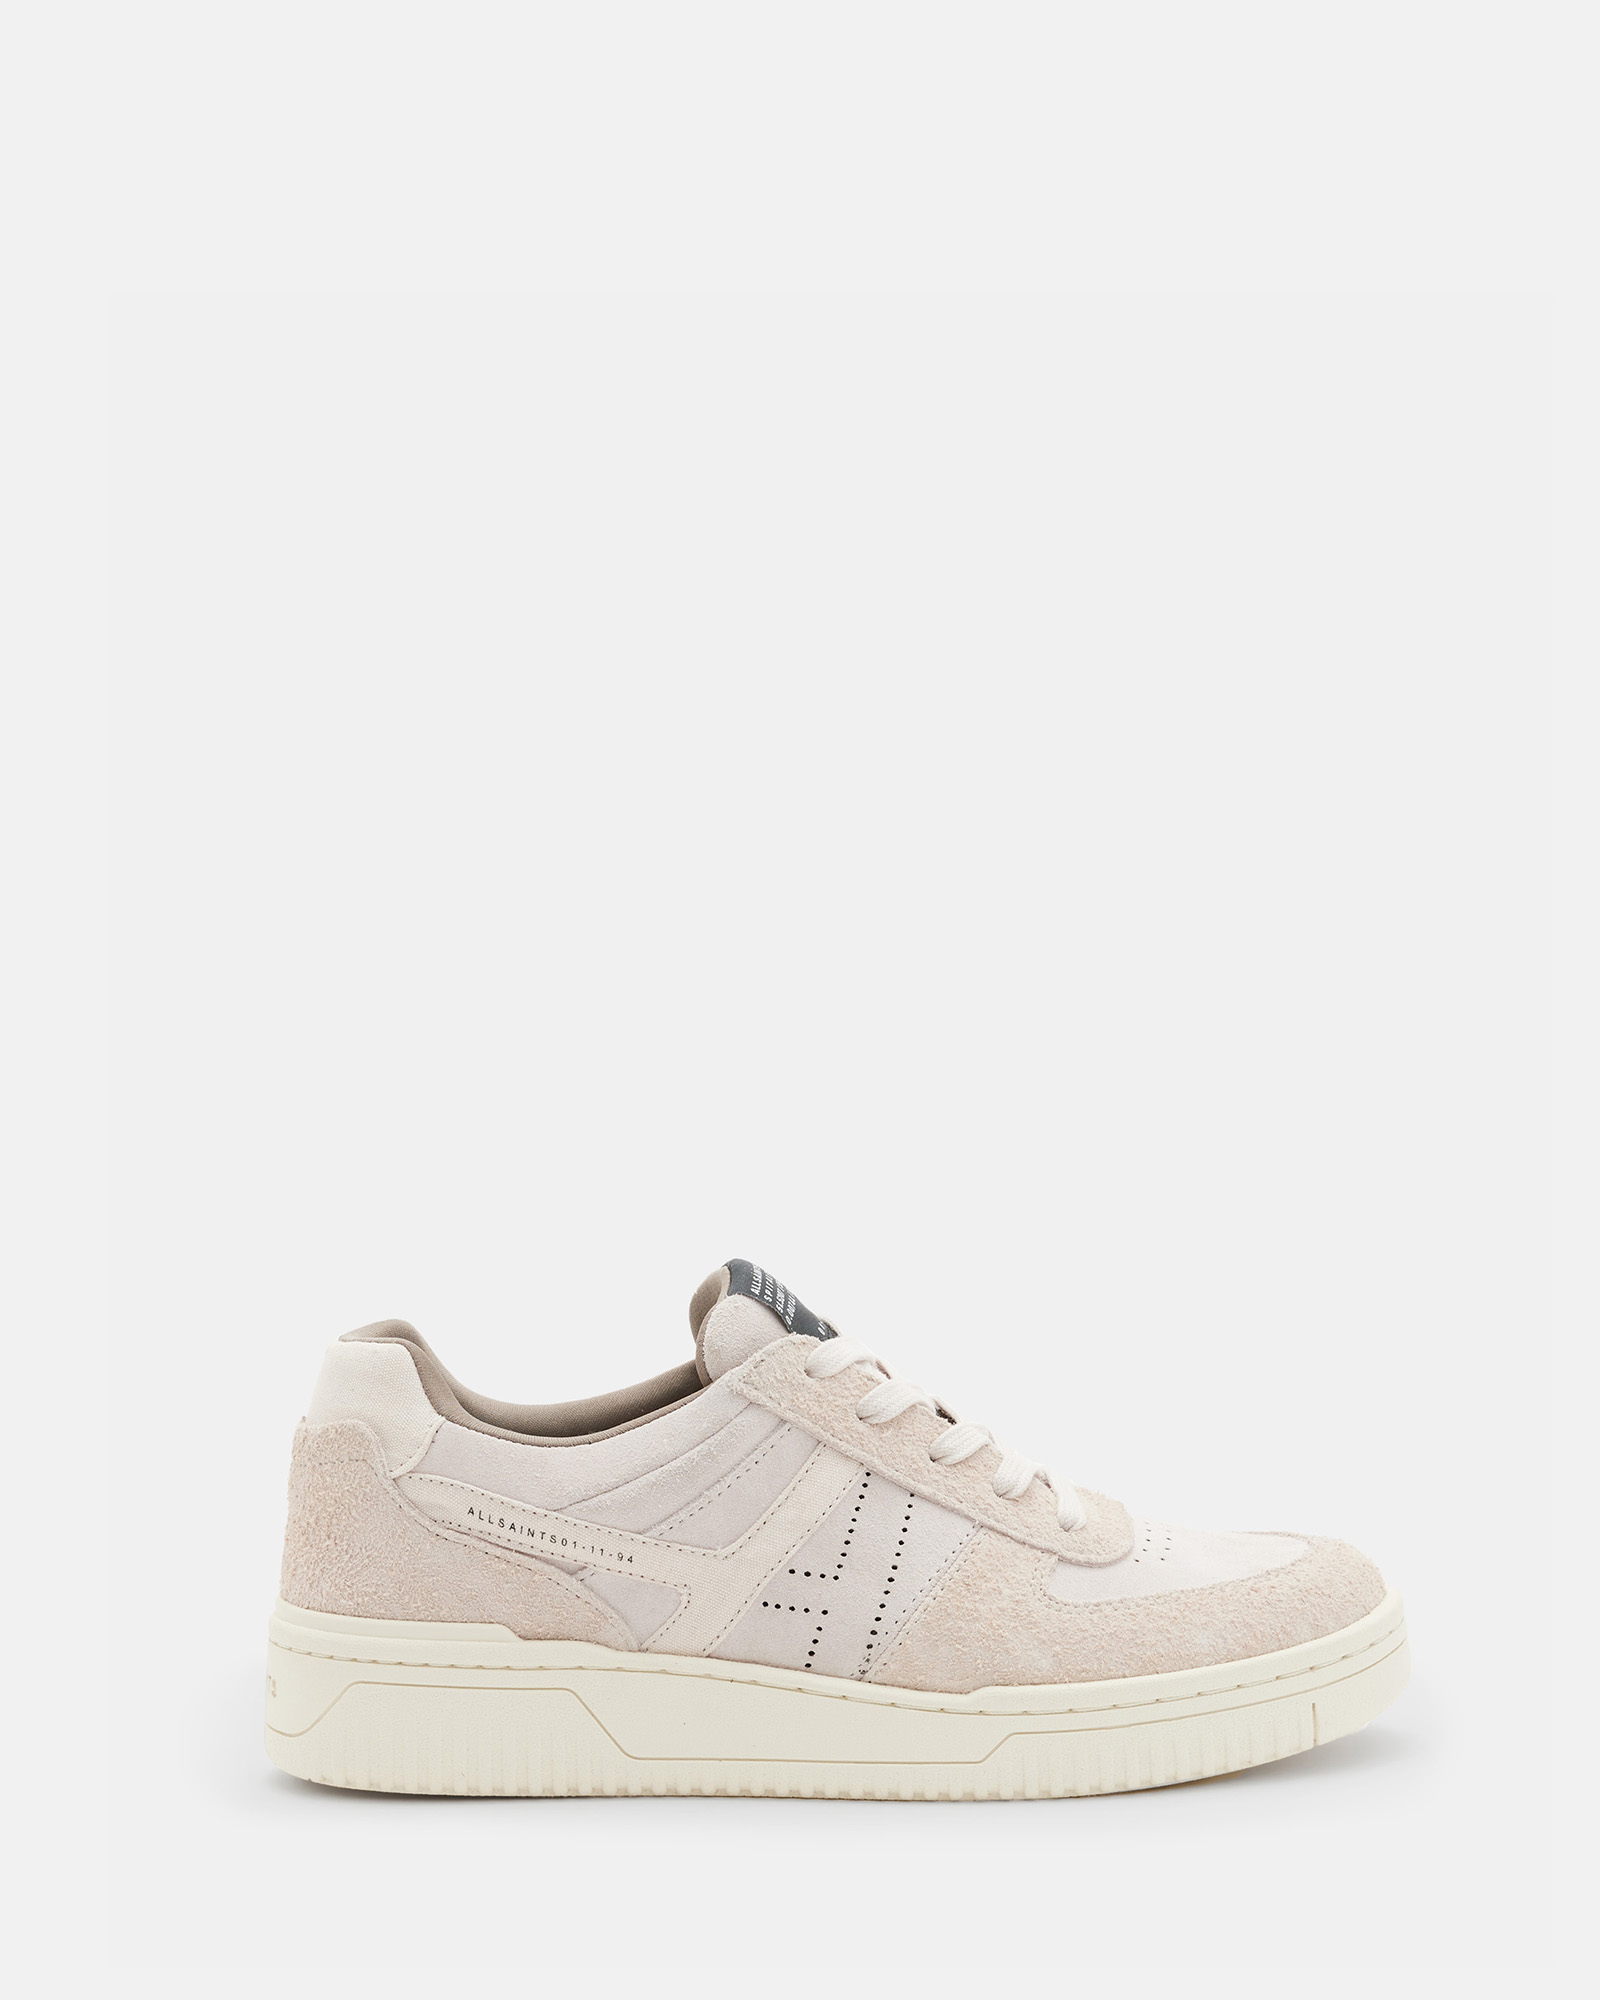 Shop Allsaints Vix Low Top Round Toe Suede Trainers, In Pale Rose Pink